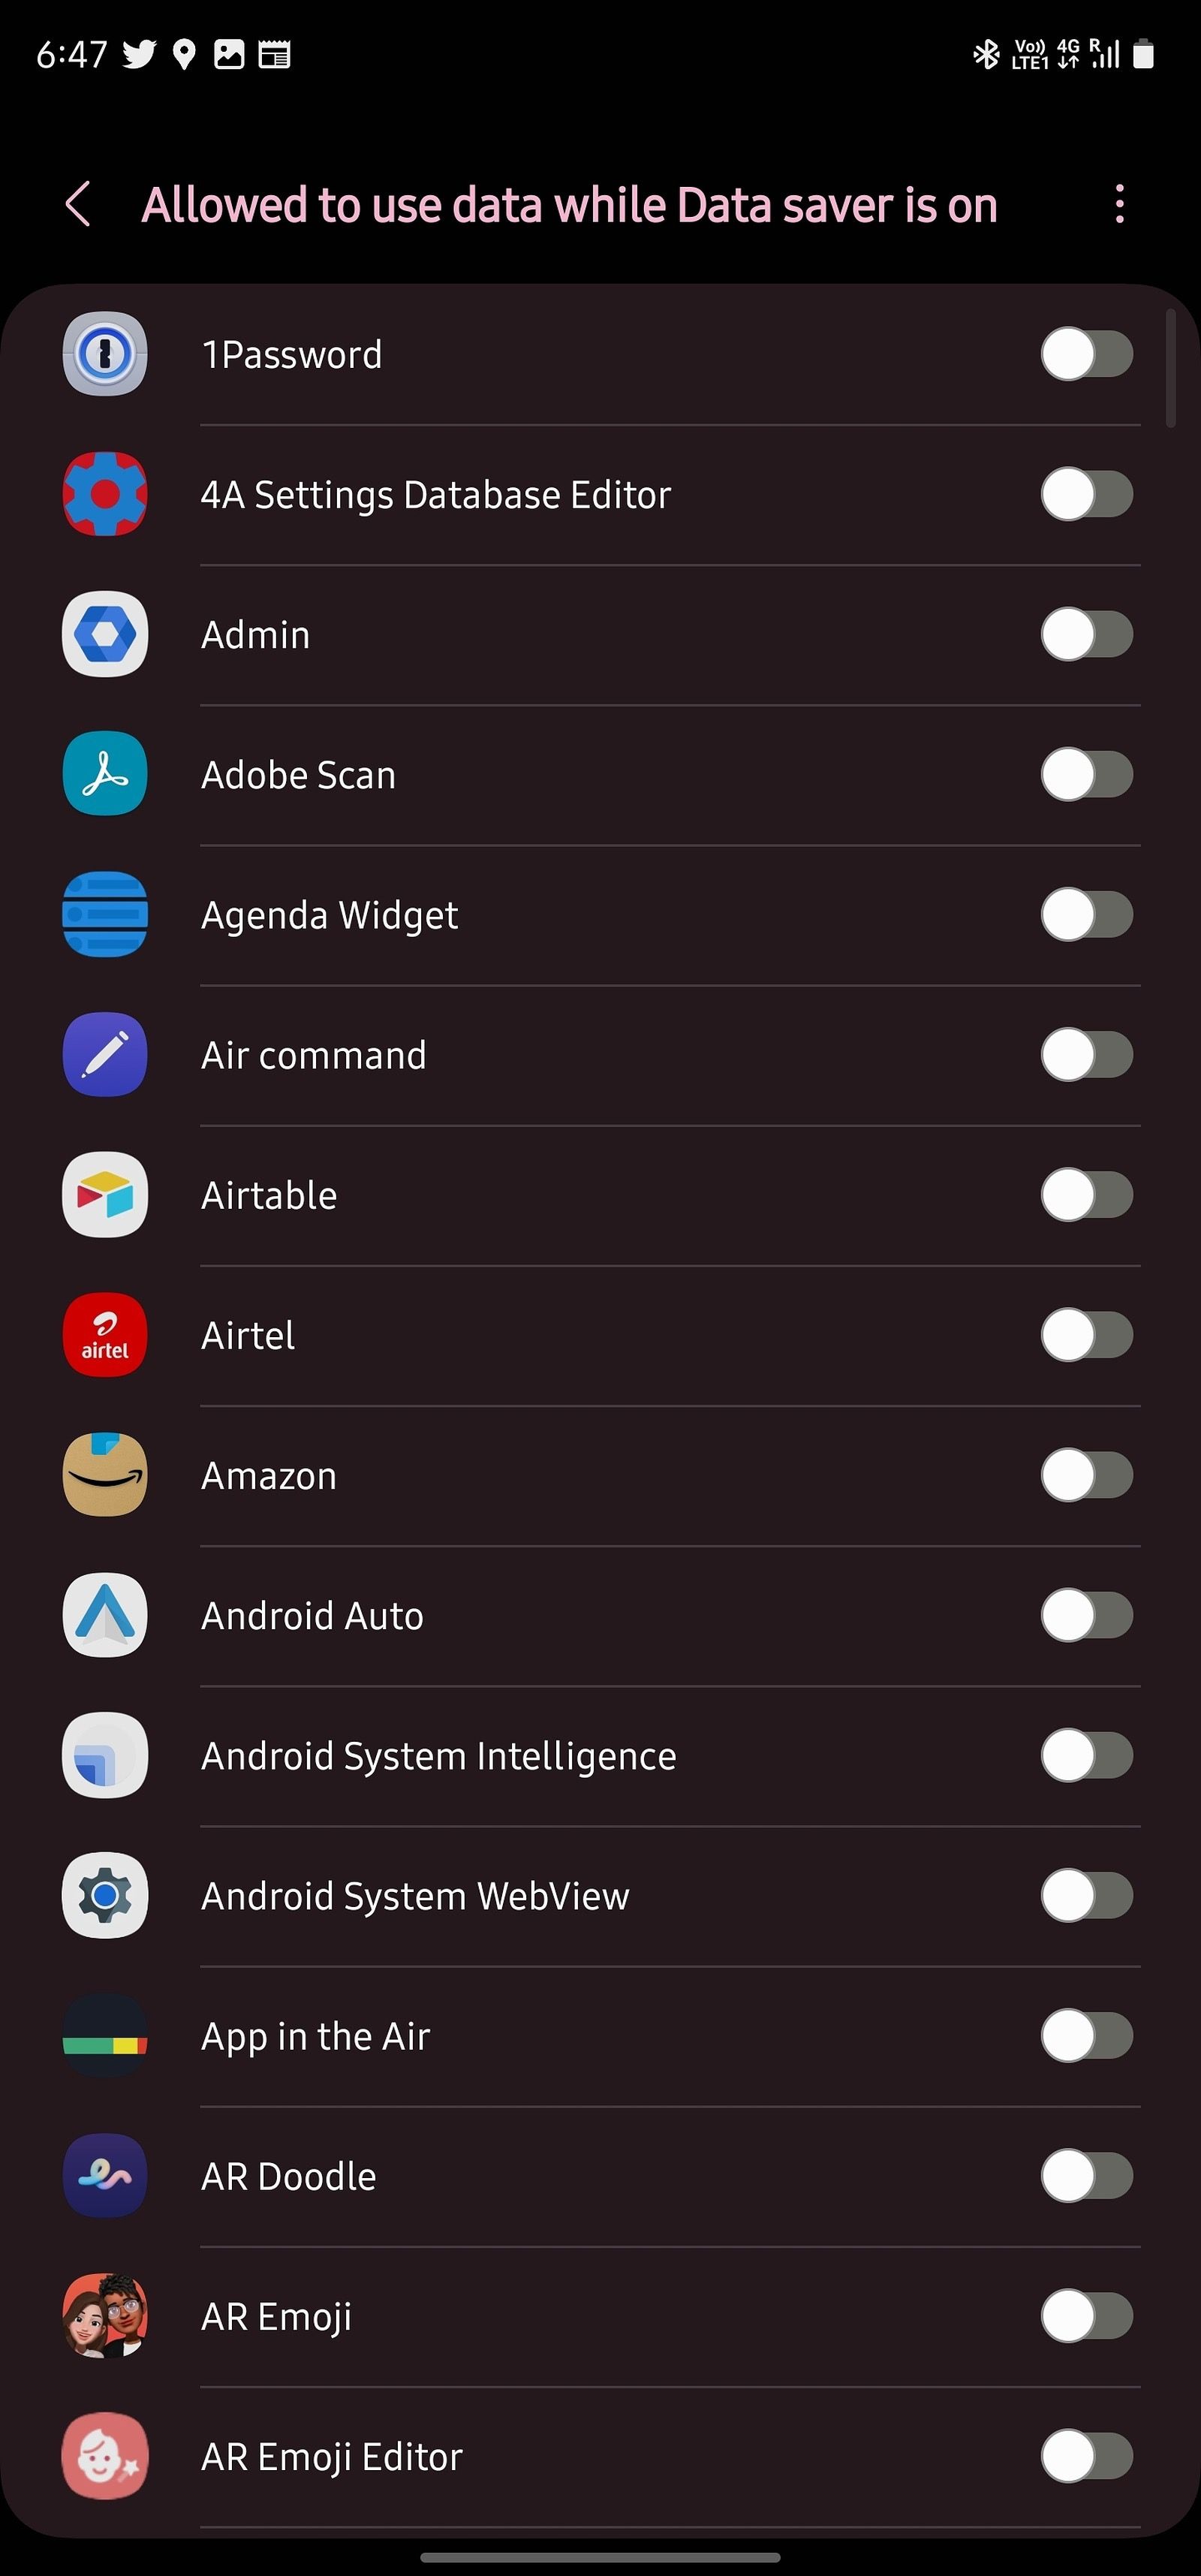 make an exception for apps on Samsung phone